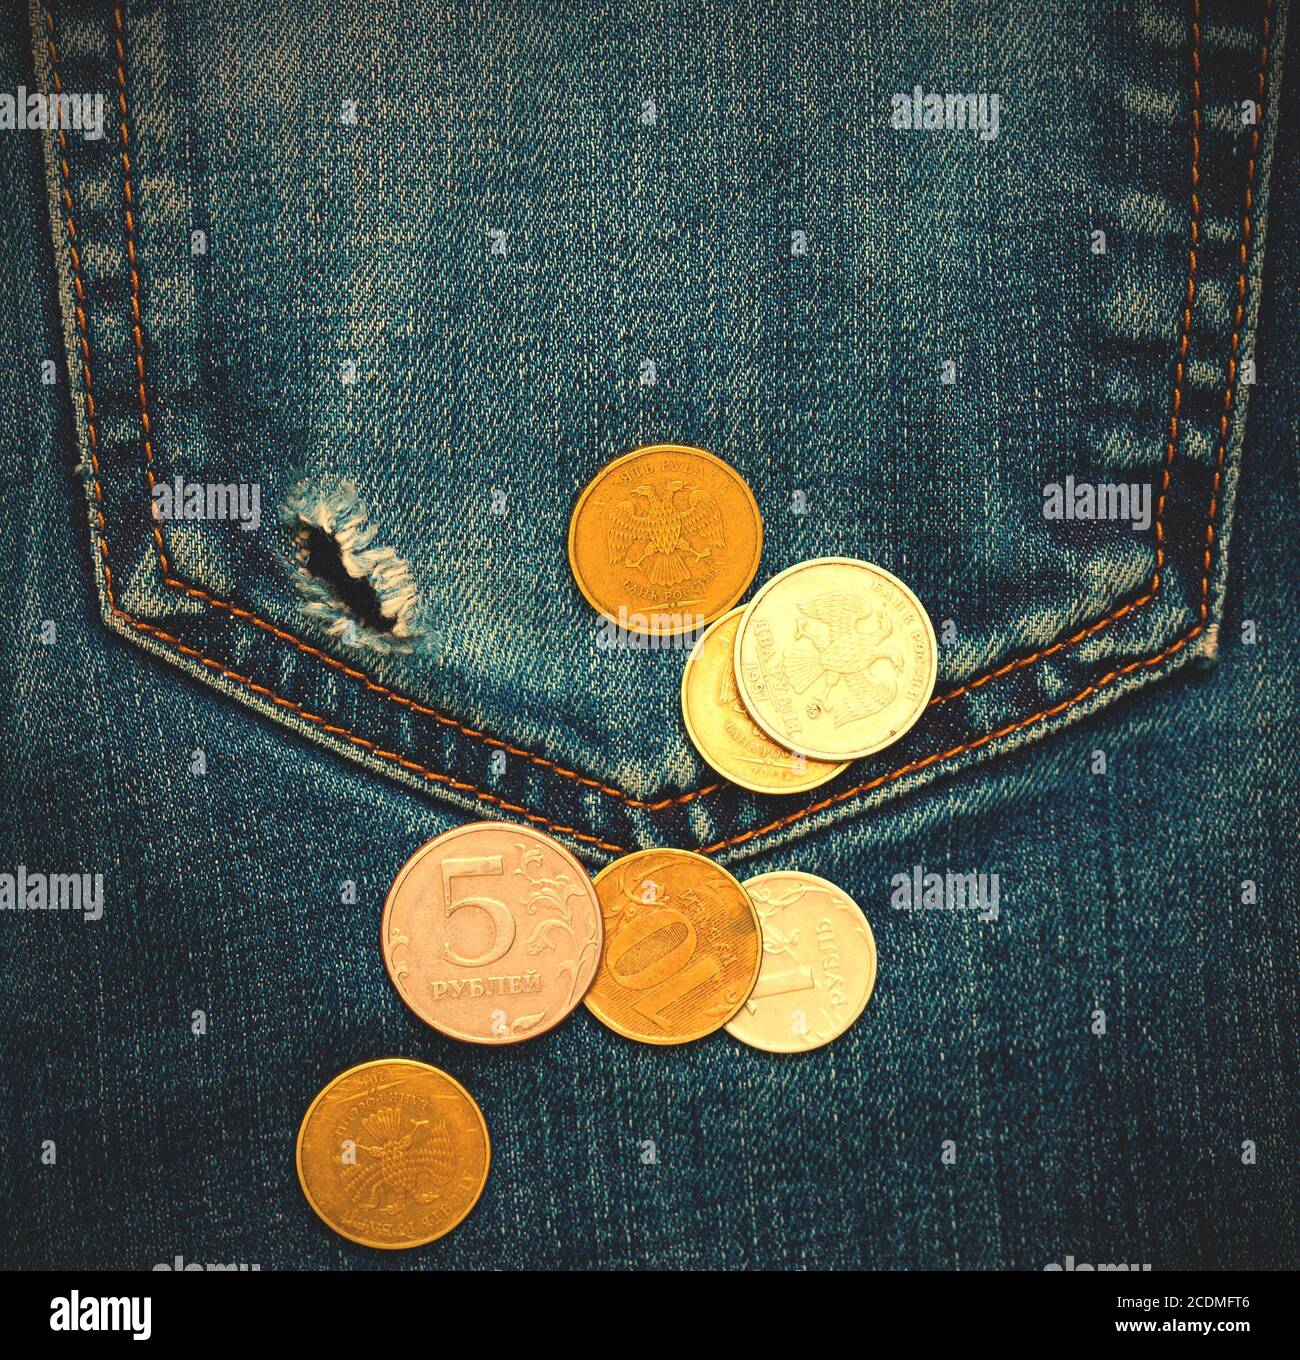 pocket with hole and coins Stock Photo